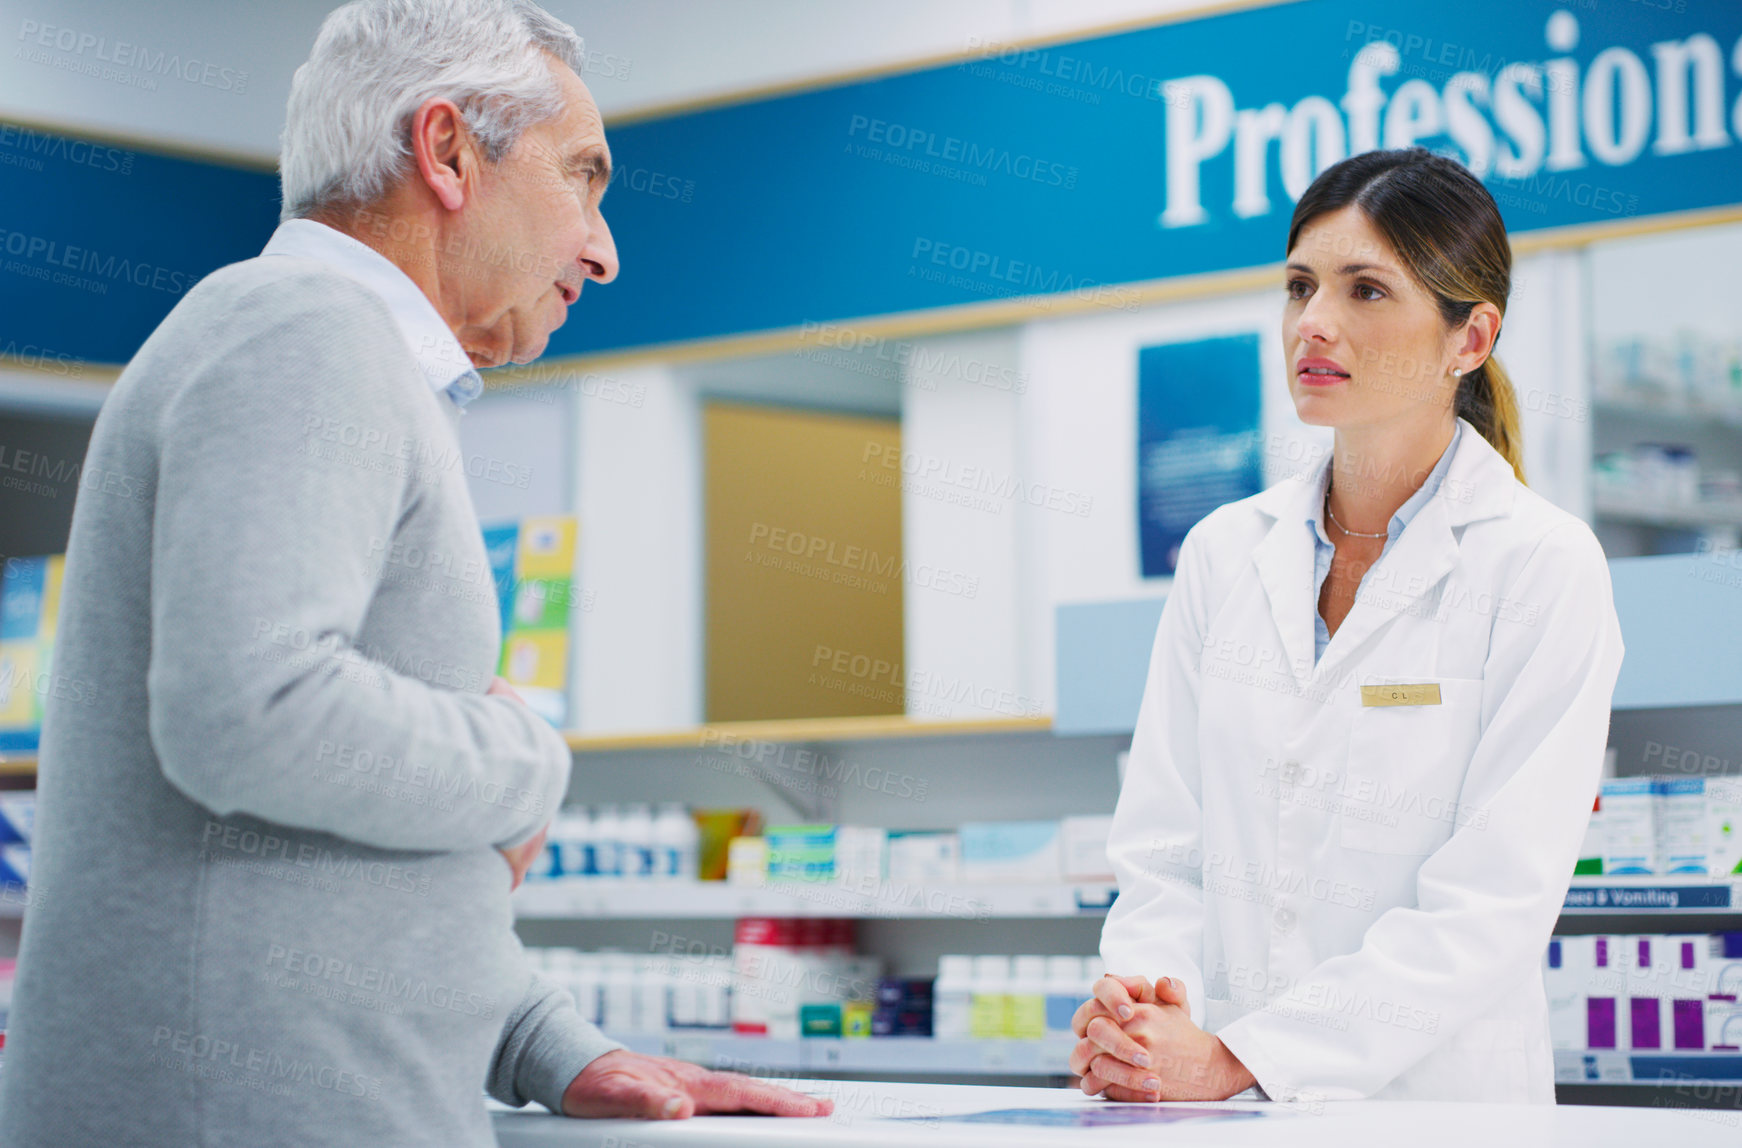 Buy stock photo Shot of a pharmacist assisting a customer in a chemist